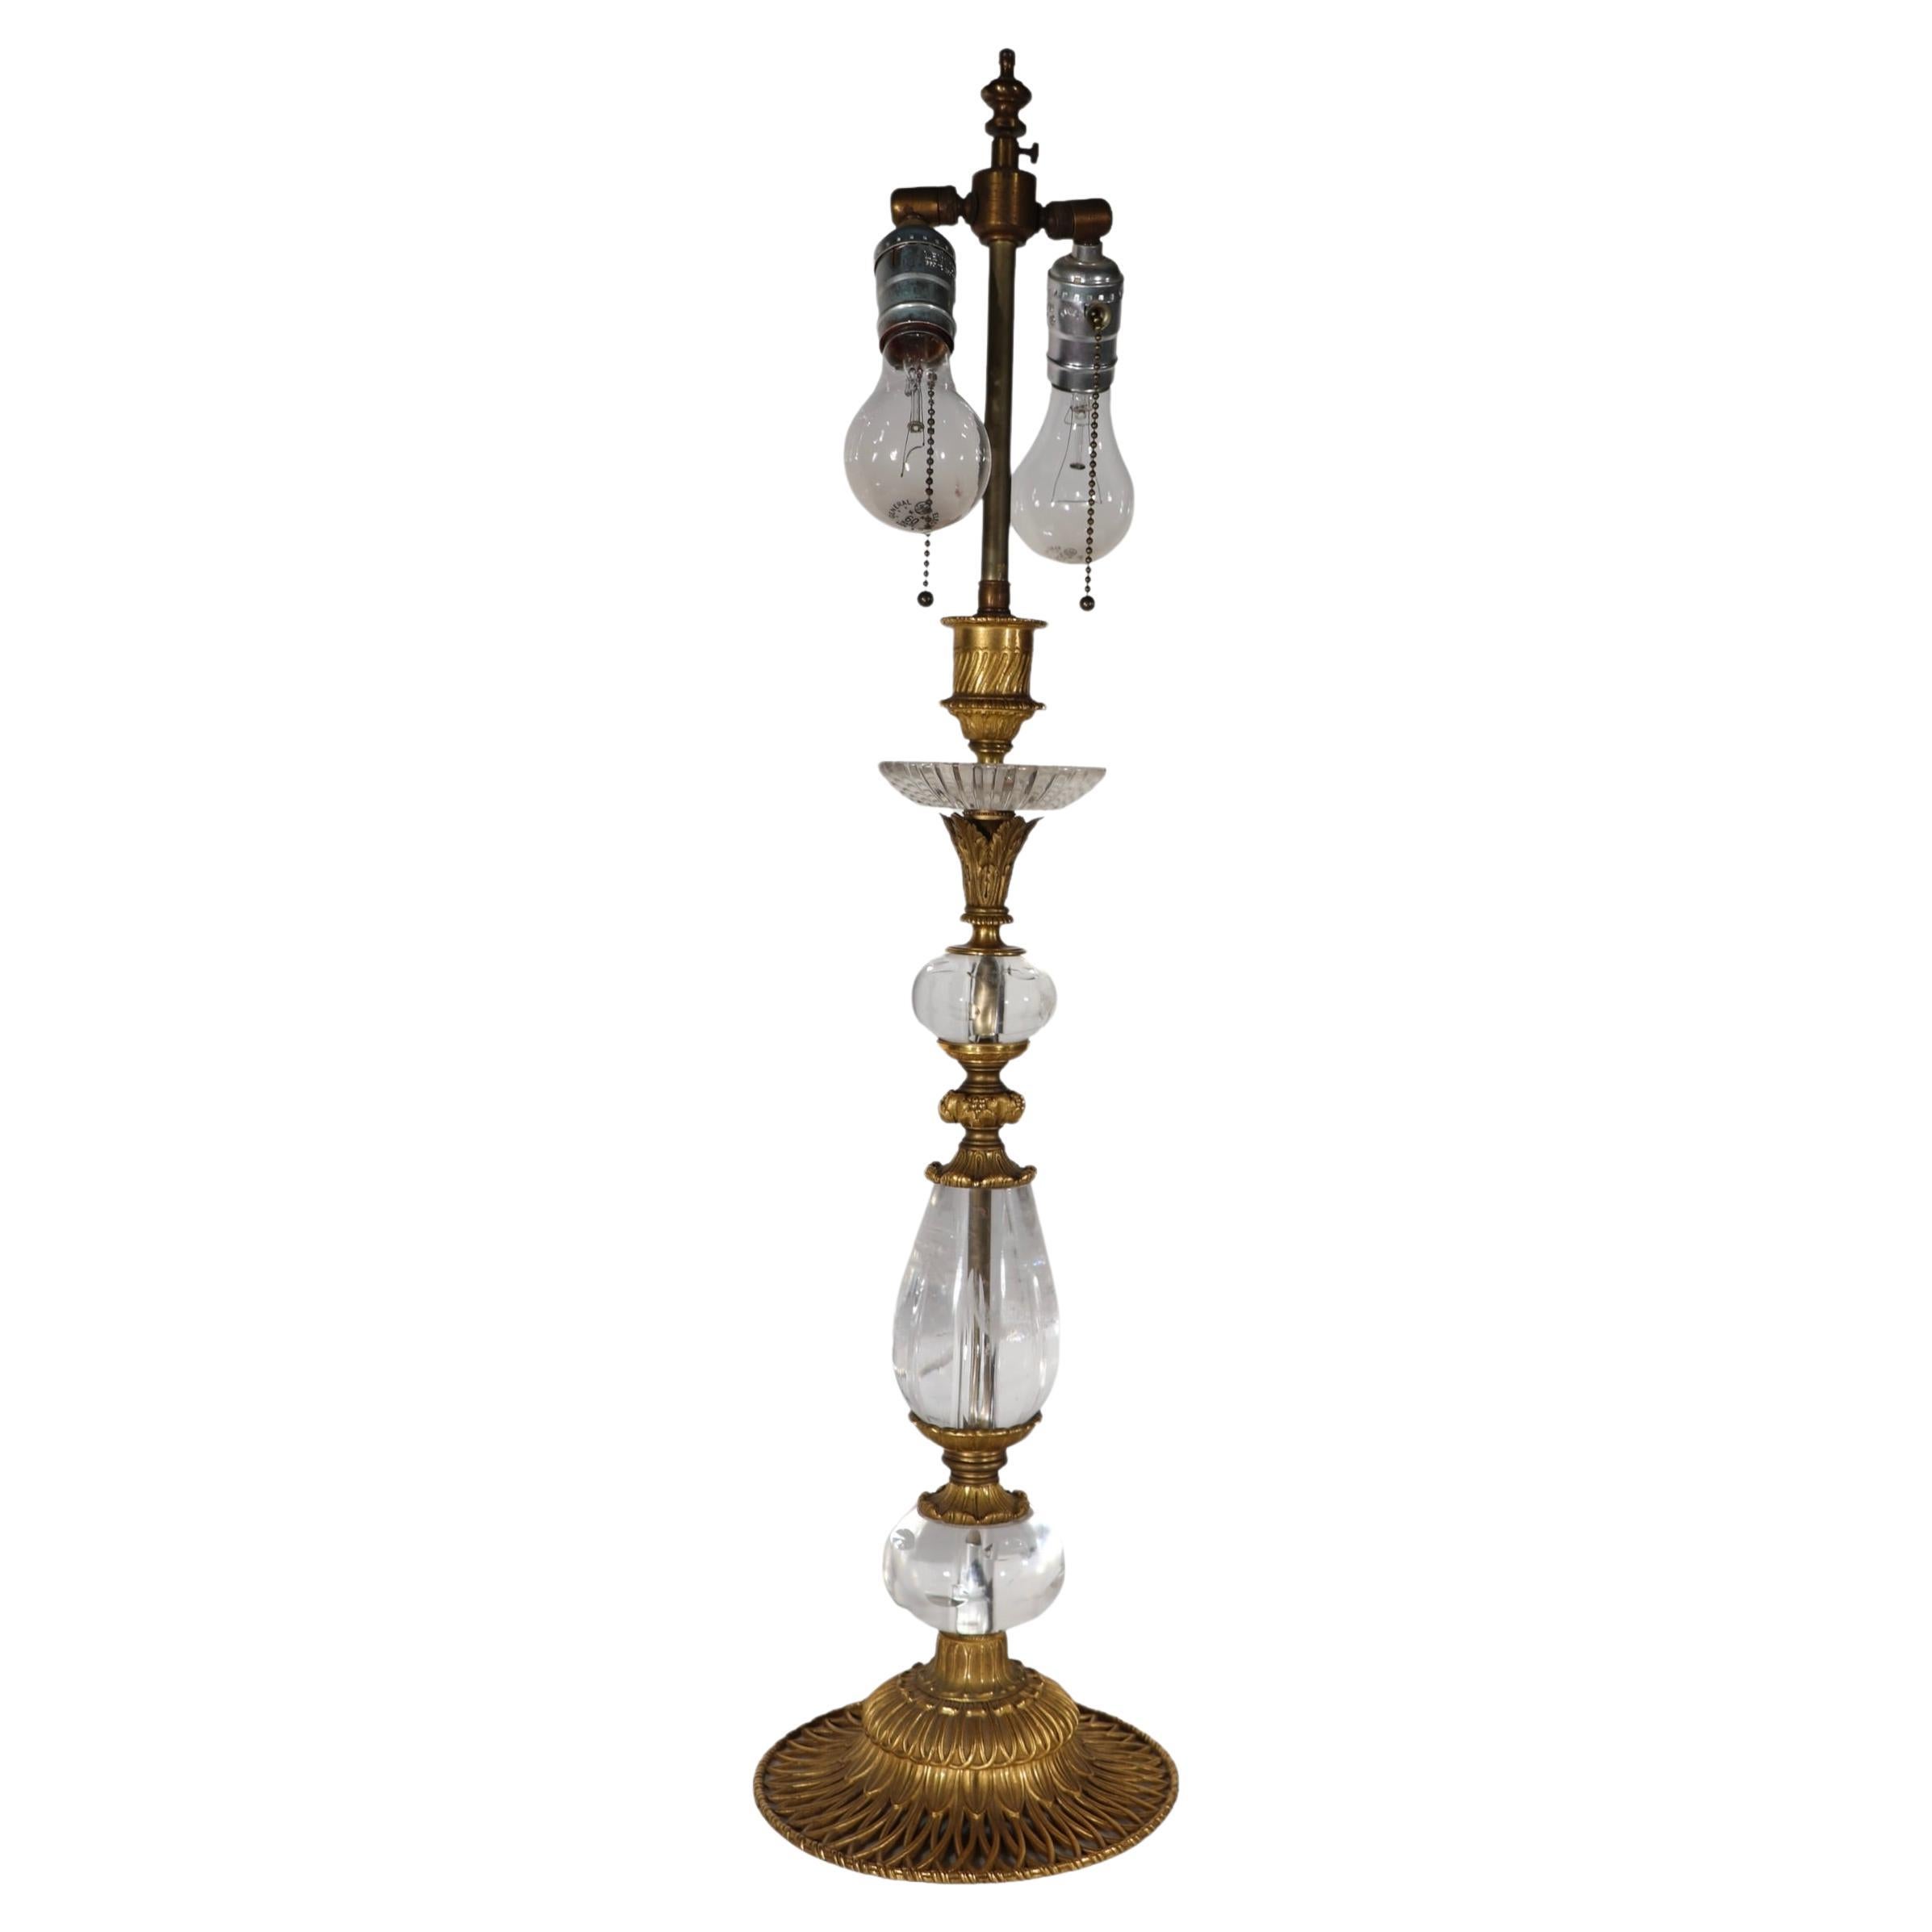   19th C French Bronze Ormolu and Rock Crystal Candlestick Table Lamp as is For Sale